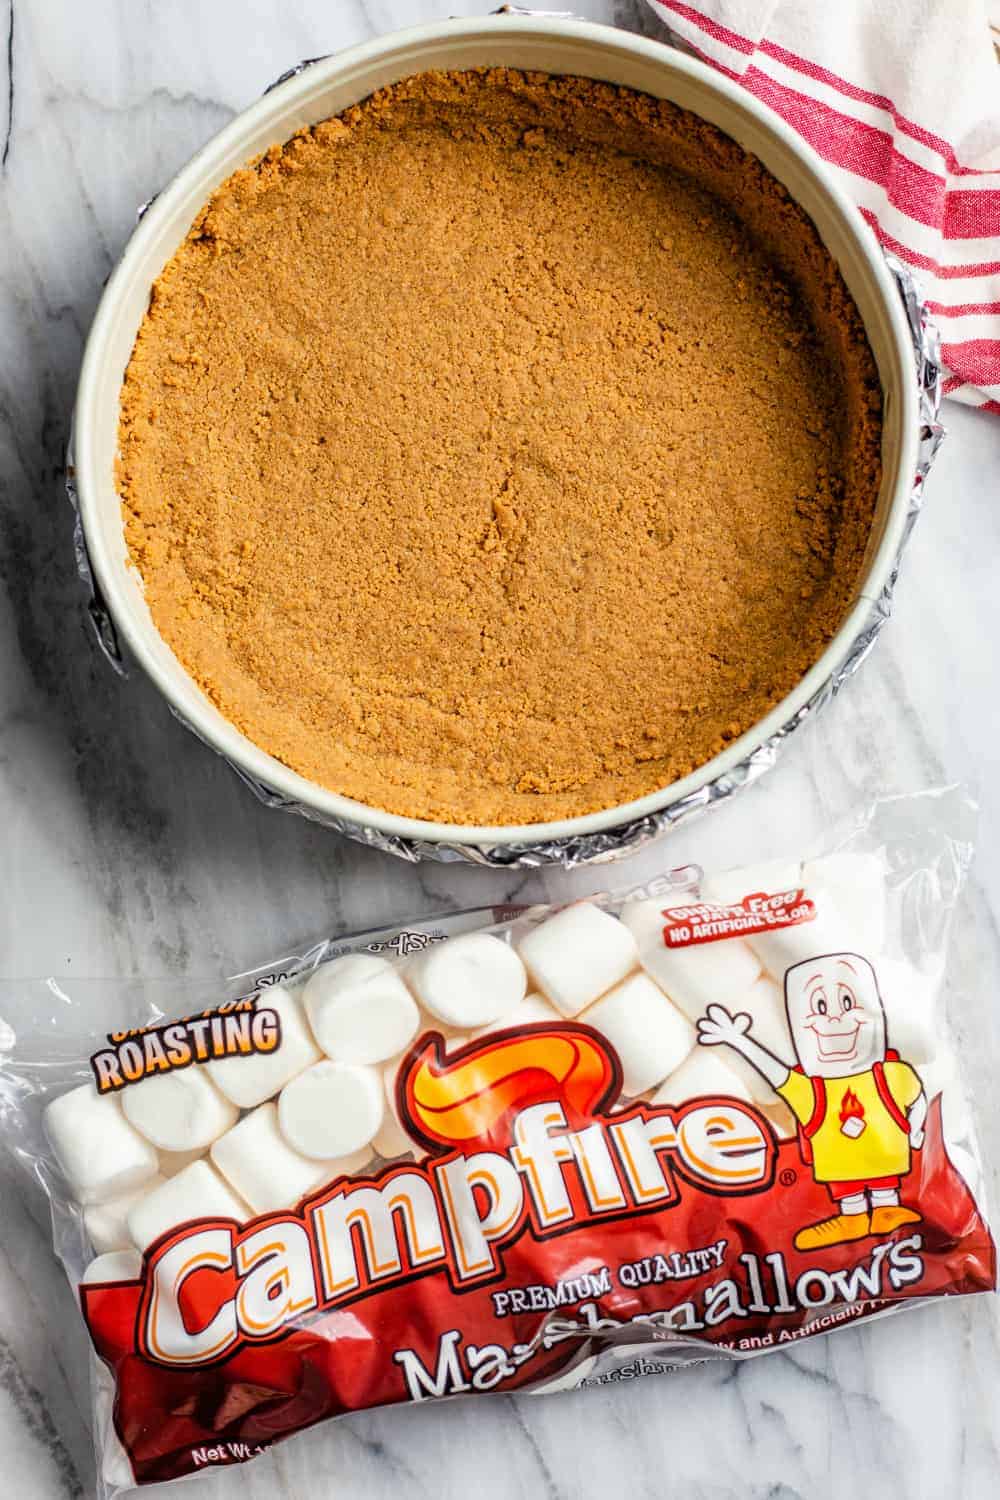 Graham cracker crust in a springform pan next to a bag of marshmallows